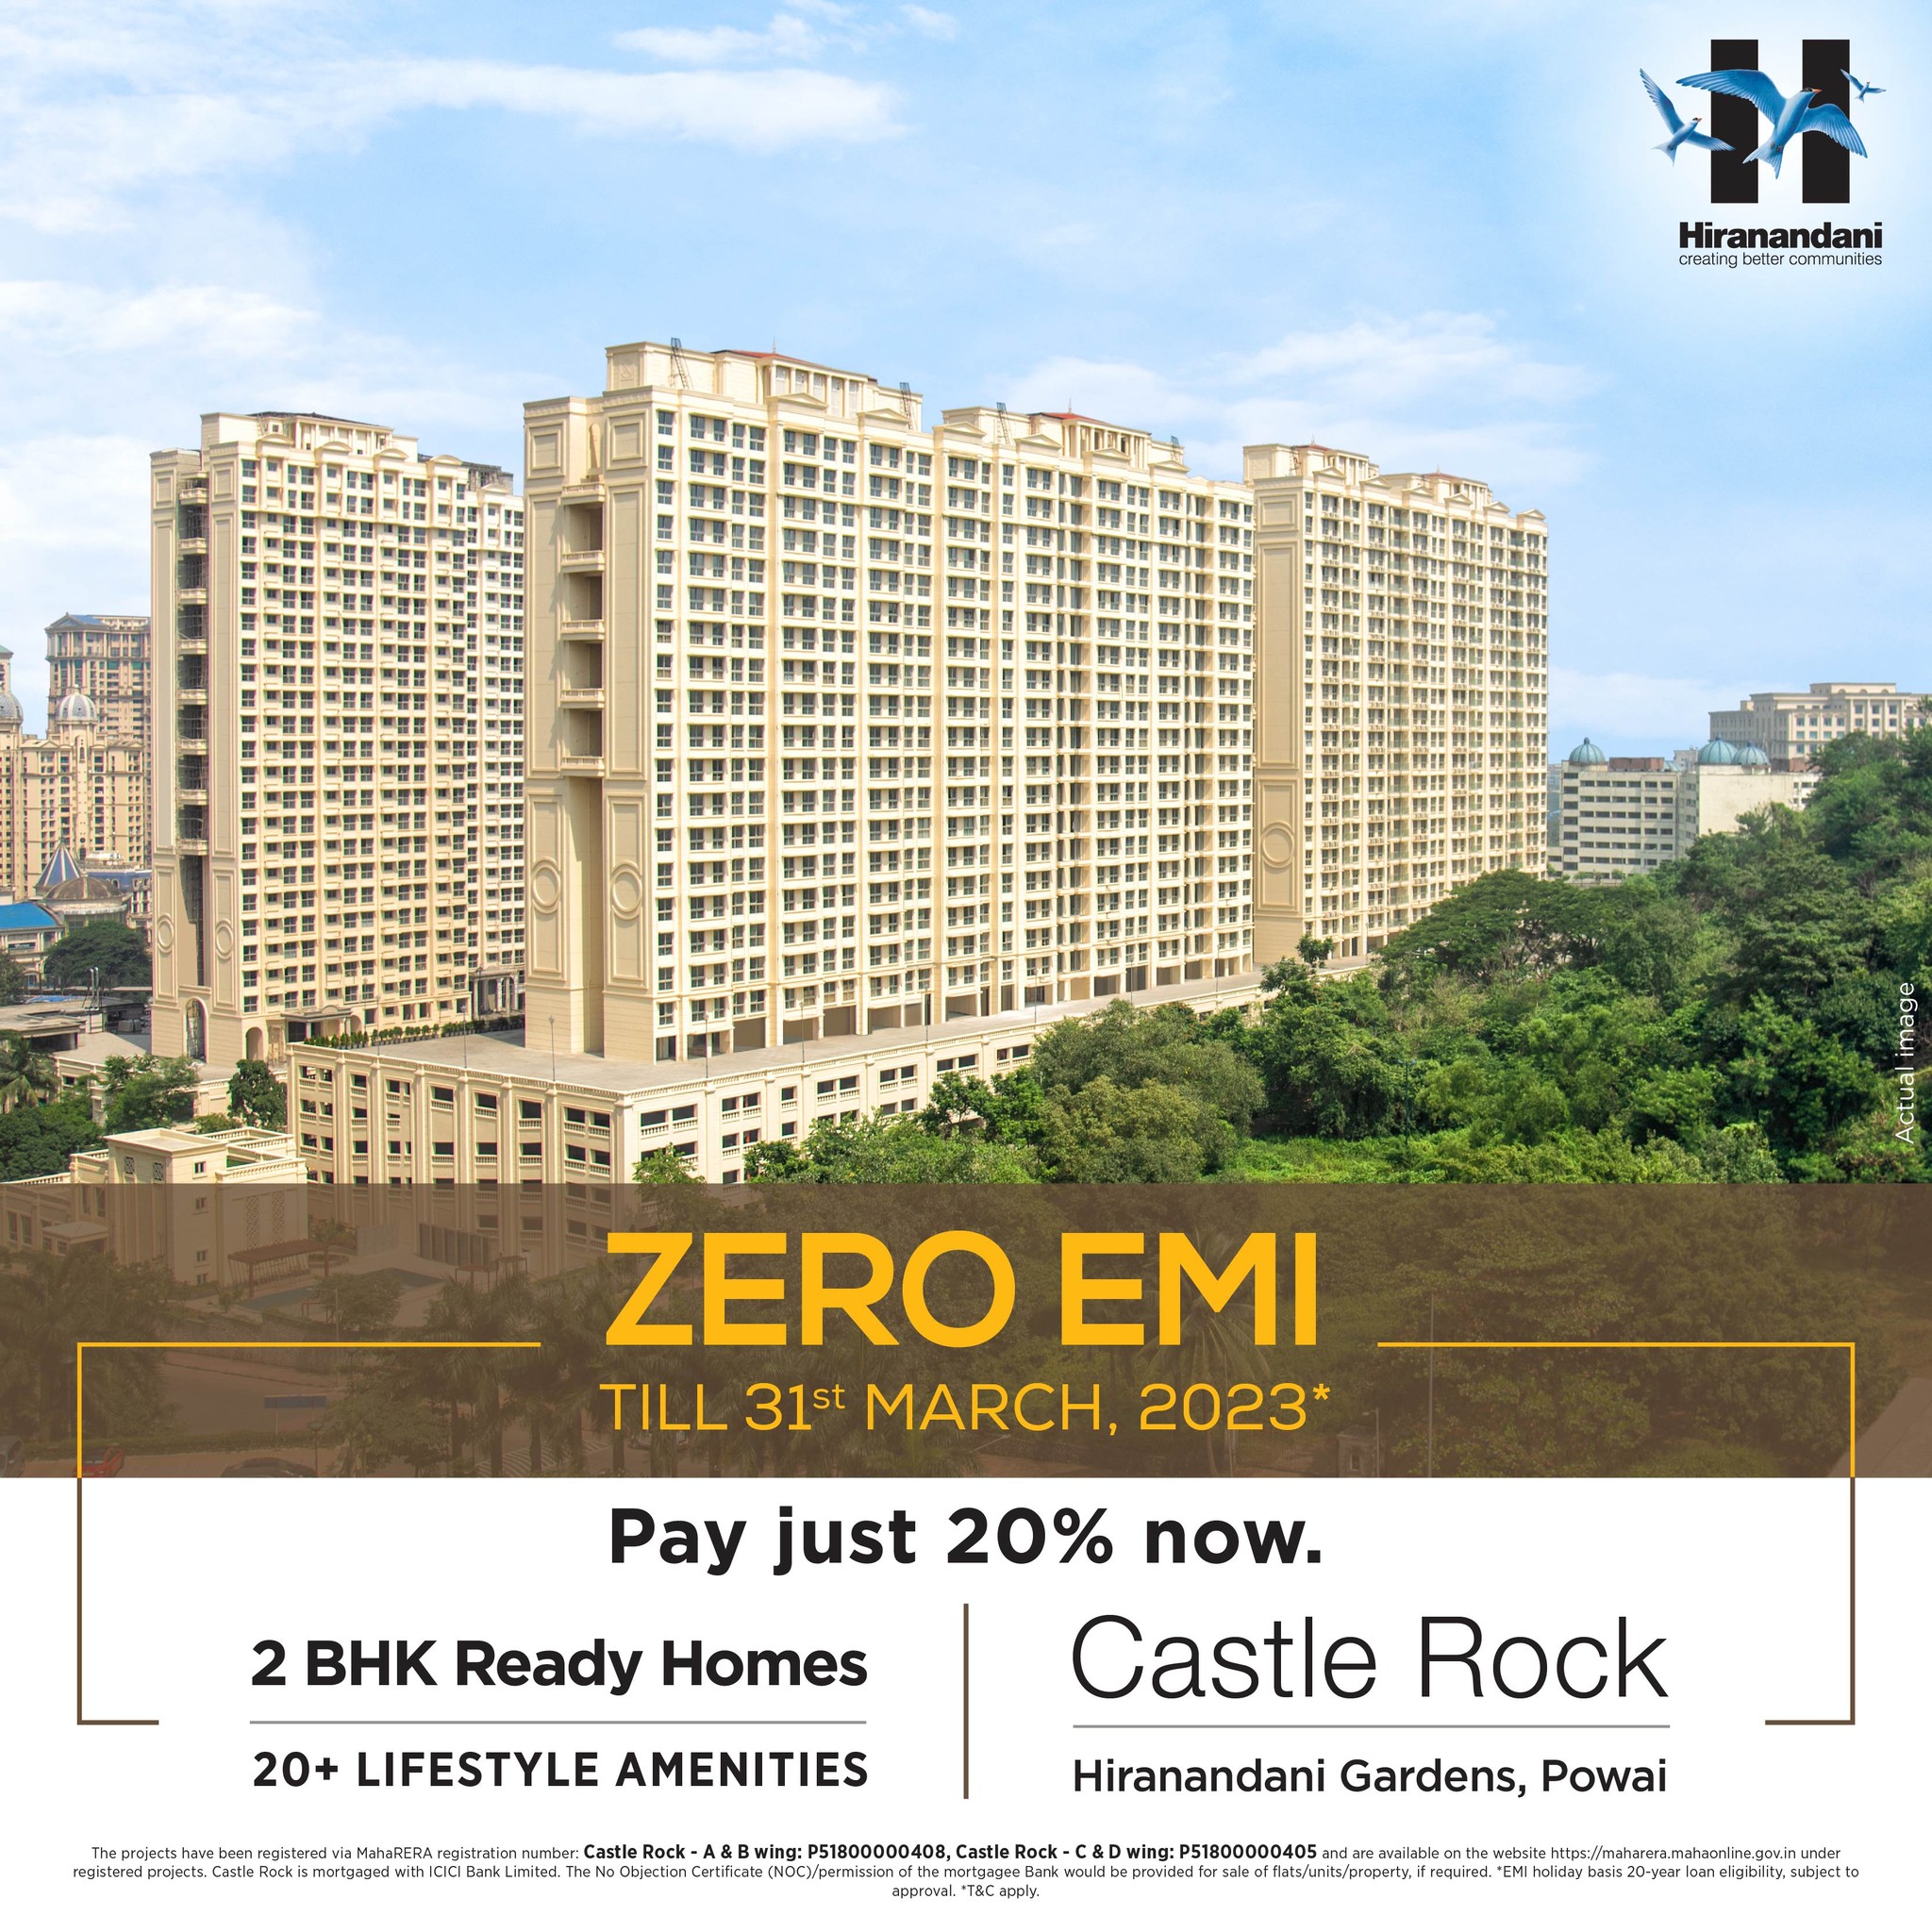 Pay just 20% now and 2 BHK ready homes at Hiranandani Castle Rock in Powai, JVLR, Mumbai Update